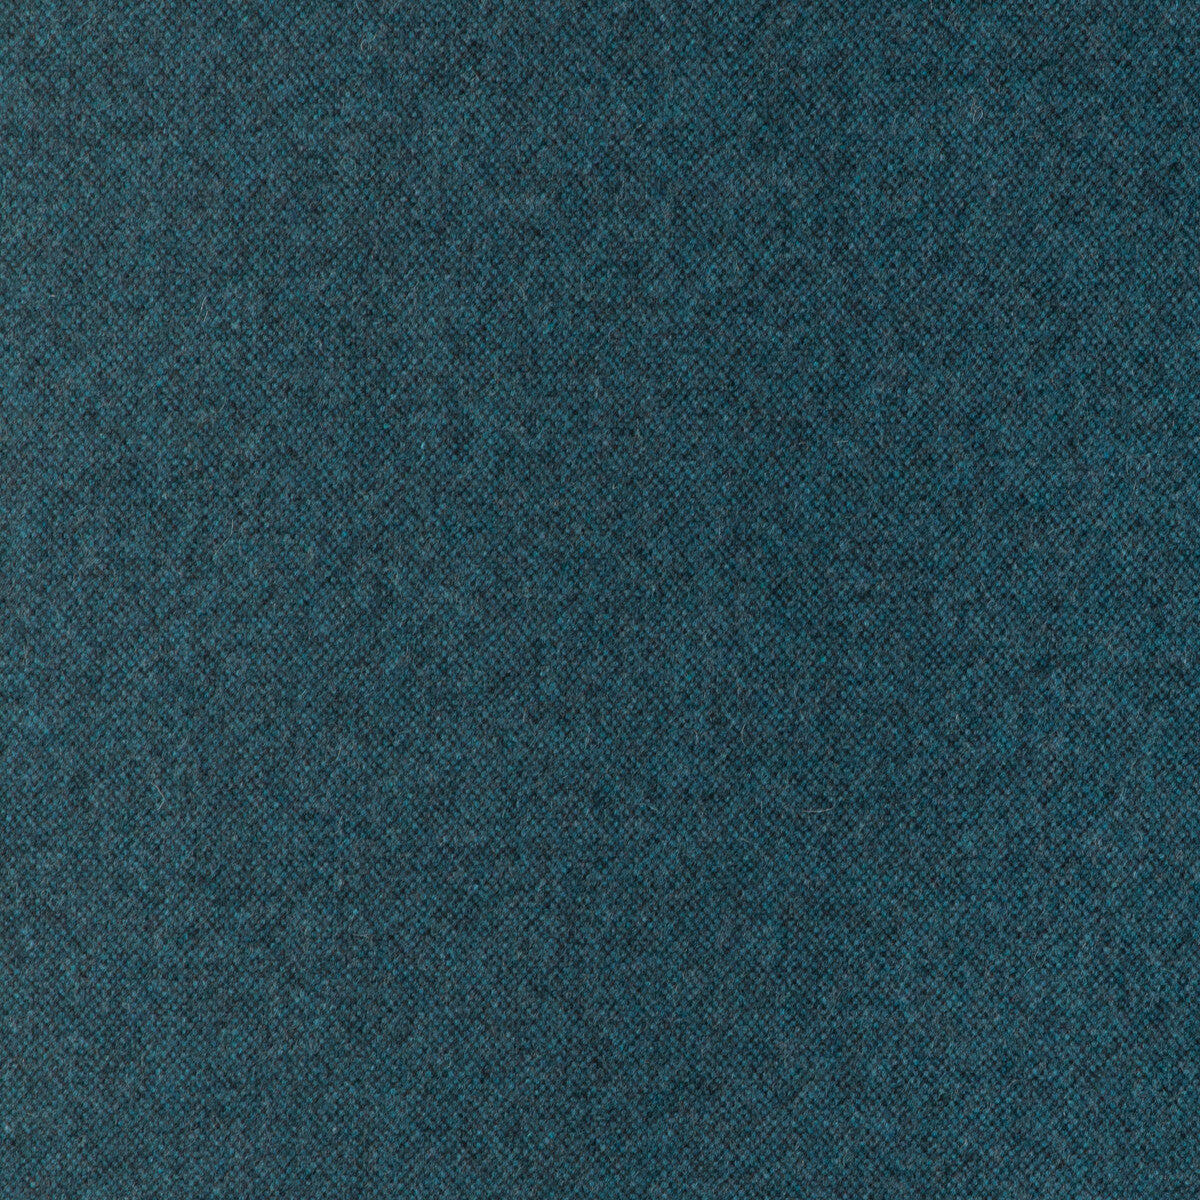 Manchester Wool fabric in neptune color - pattern 37026.535.0 - by Kravet Contract